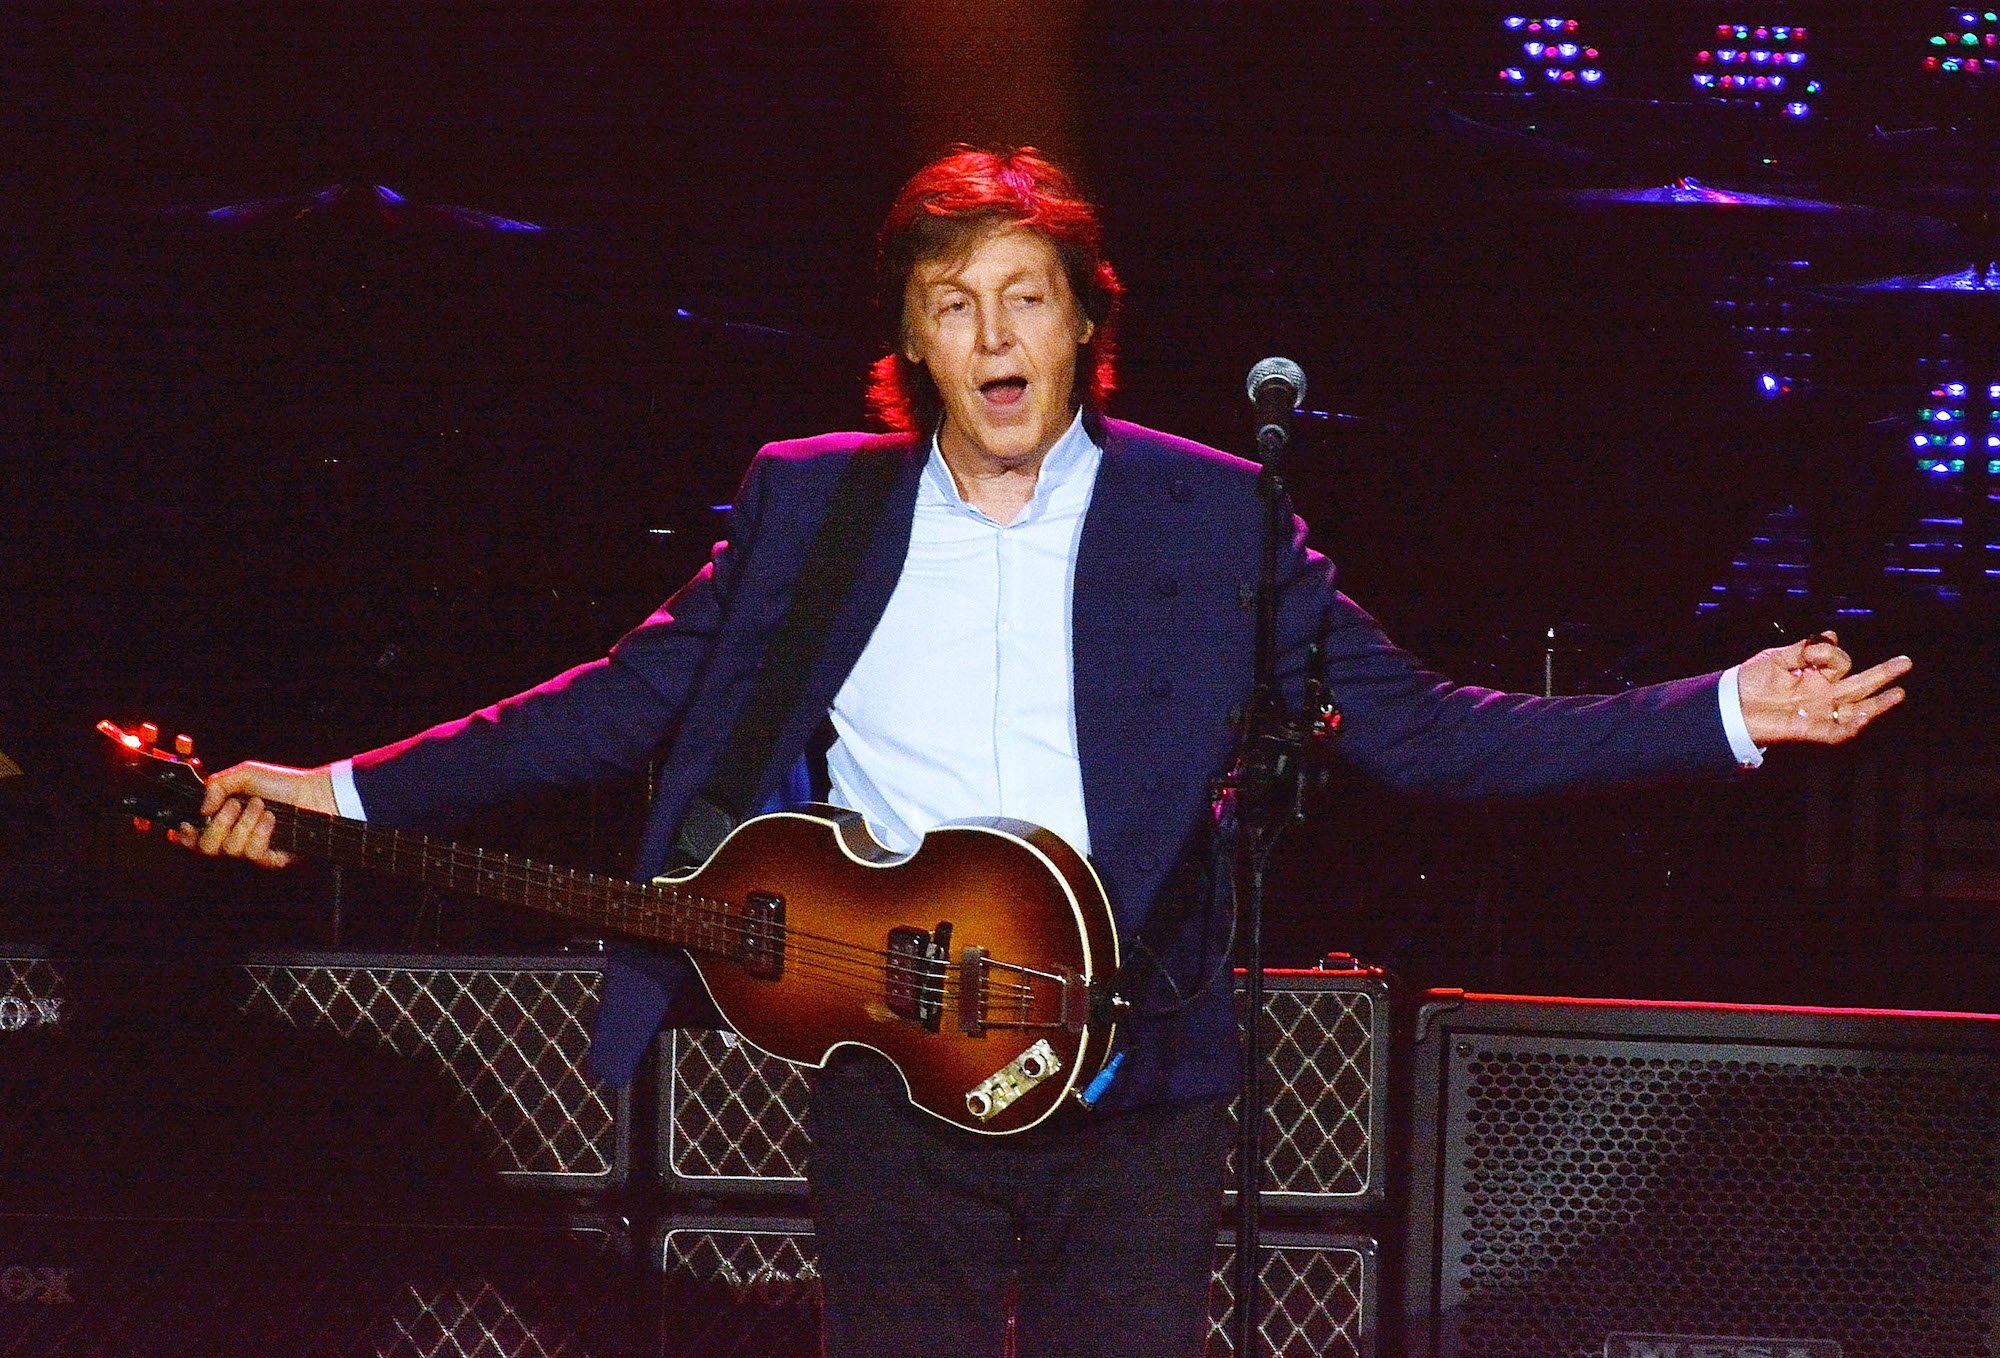 Paul McCartney performs at the O2 Arena in London, England, in 2015